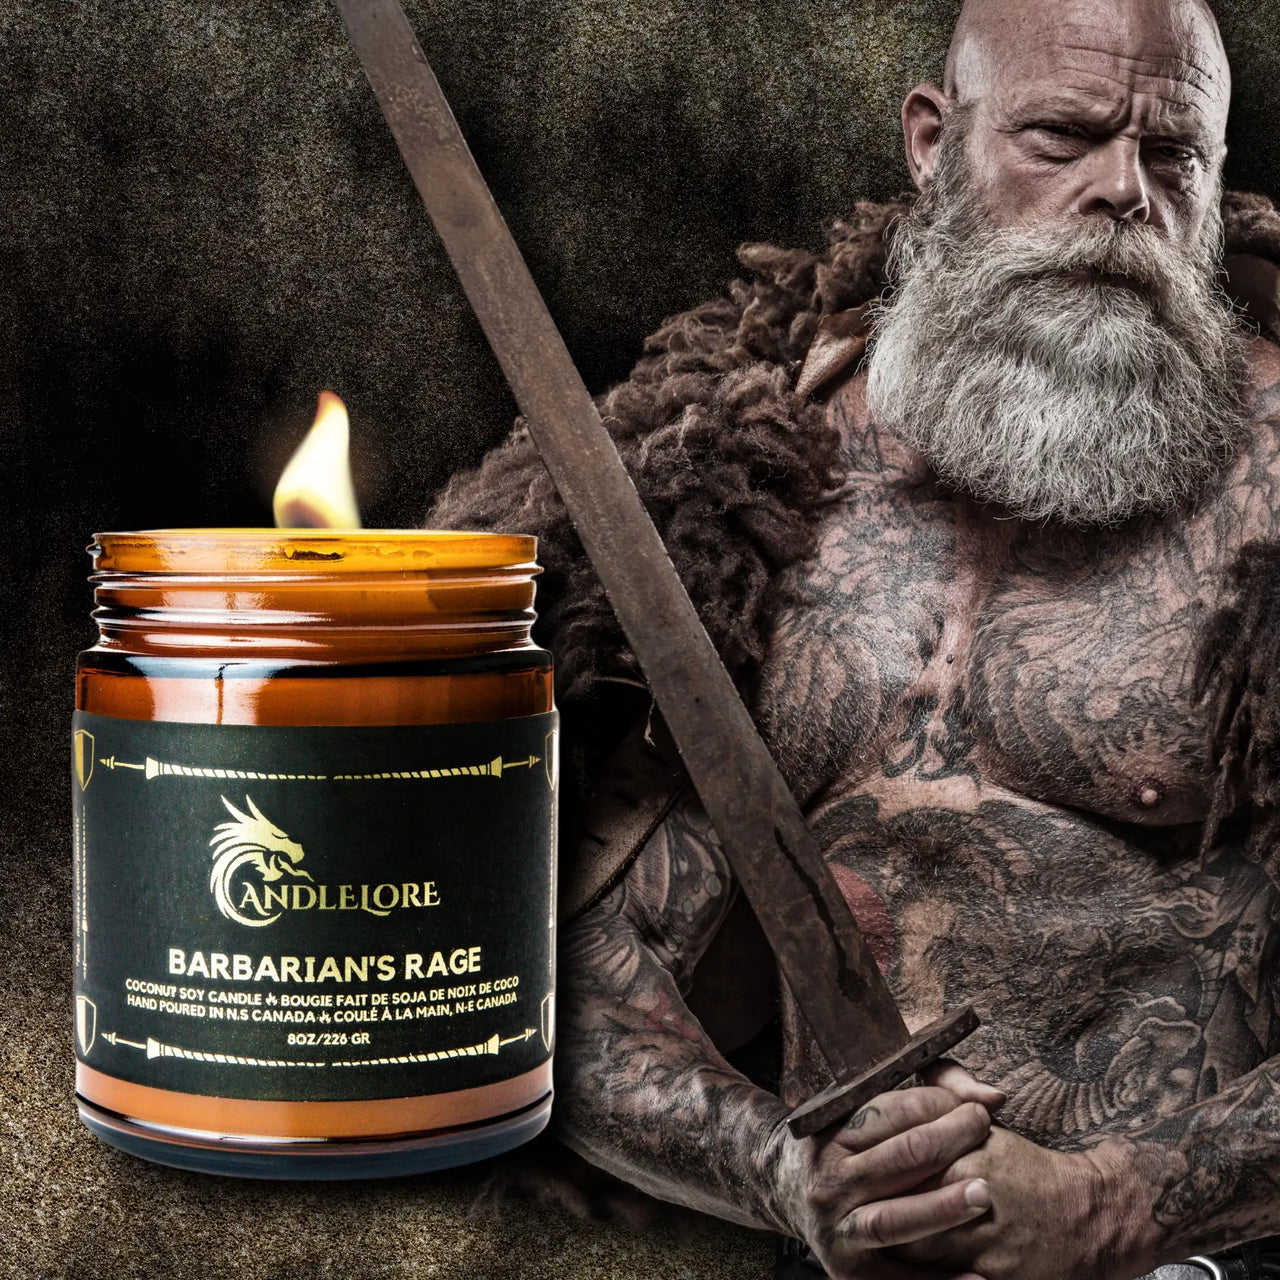 A Barbarian with a candle beside him